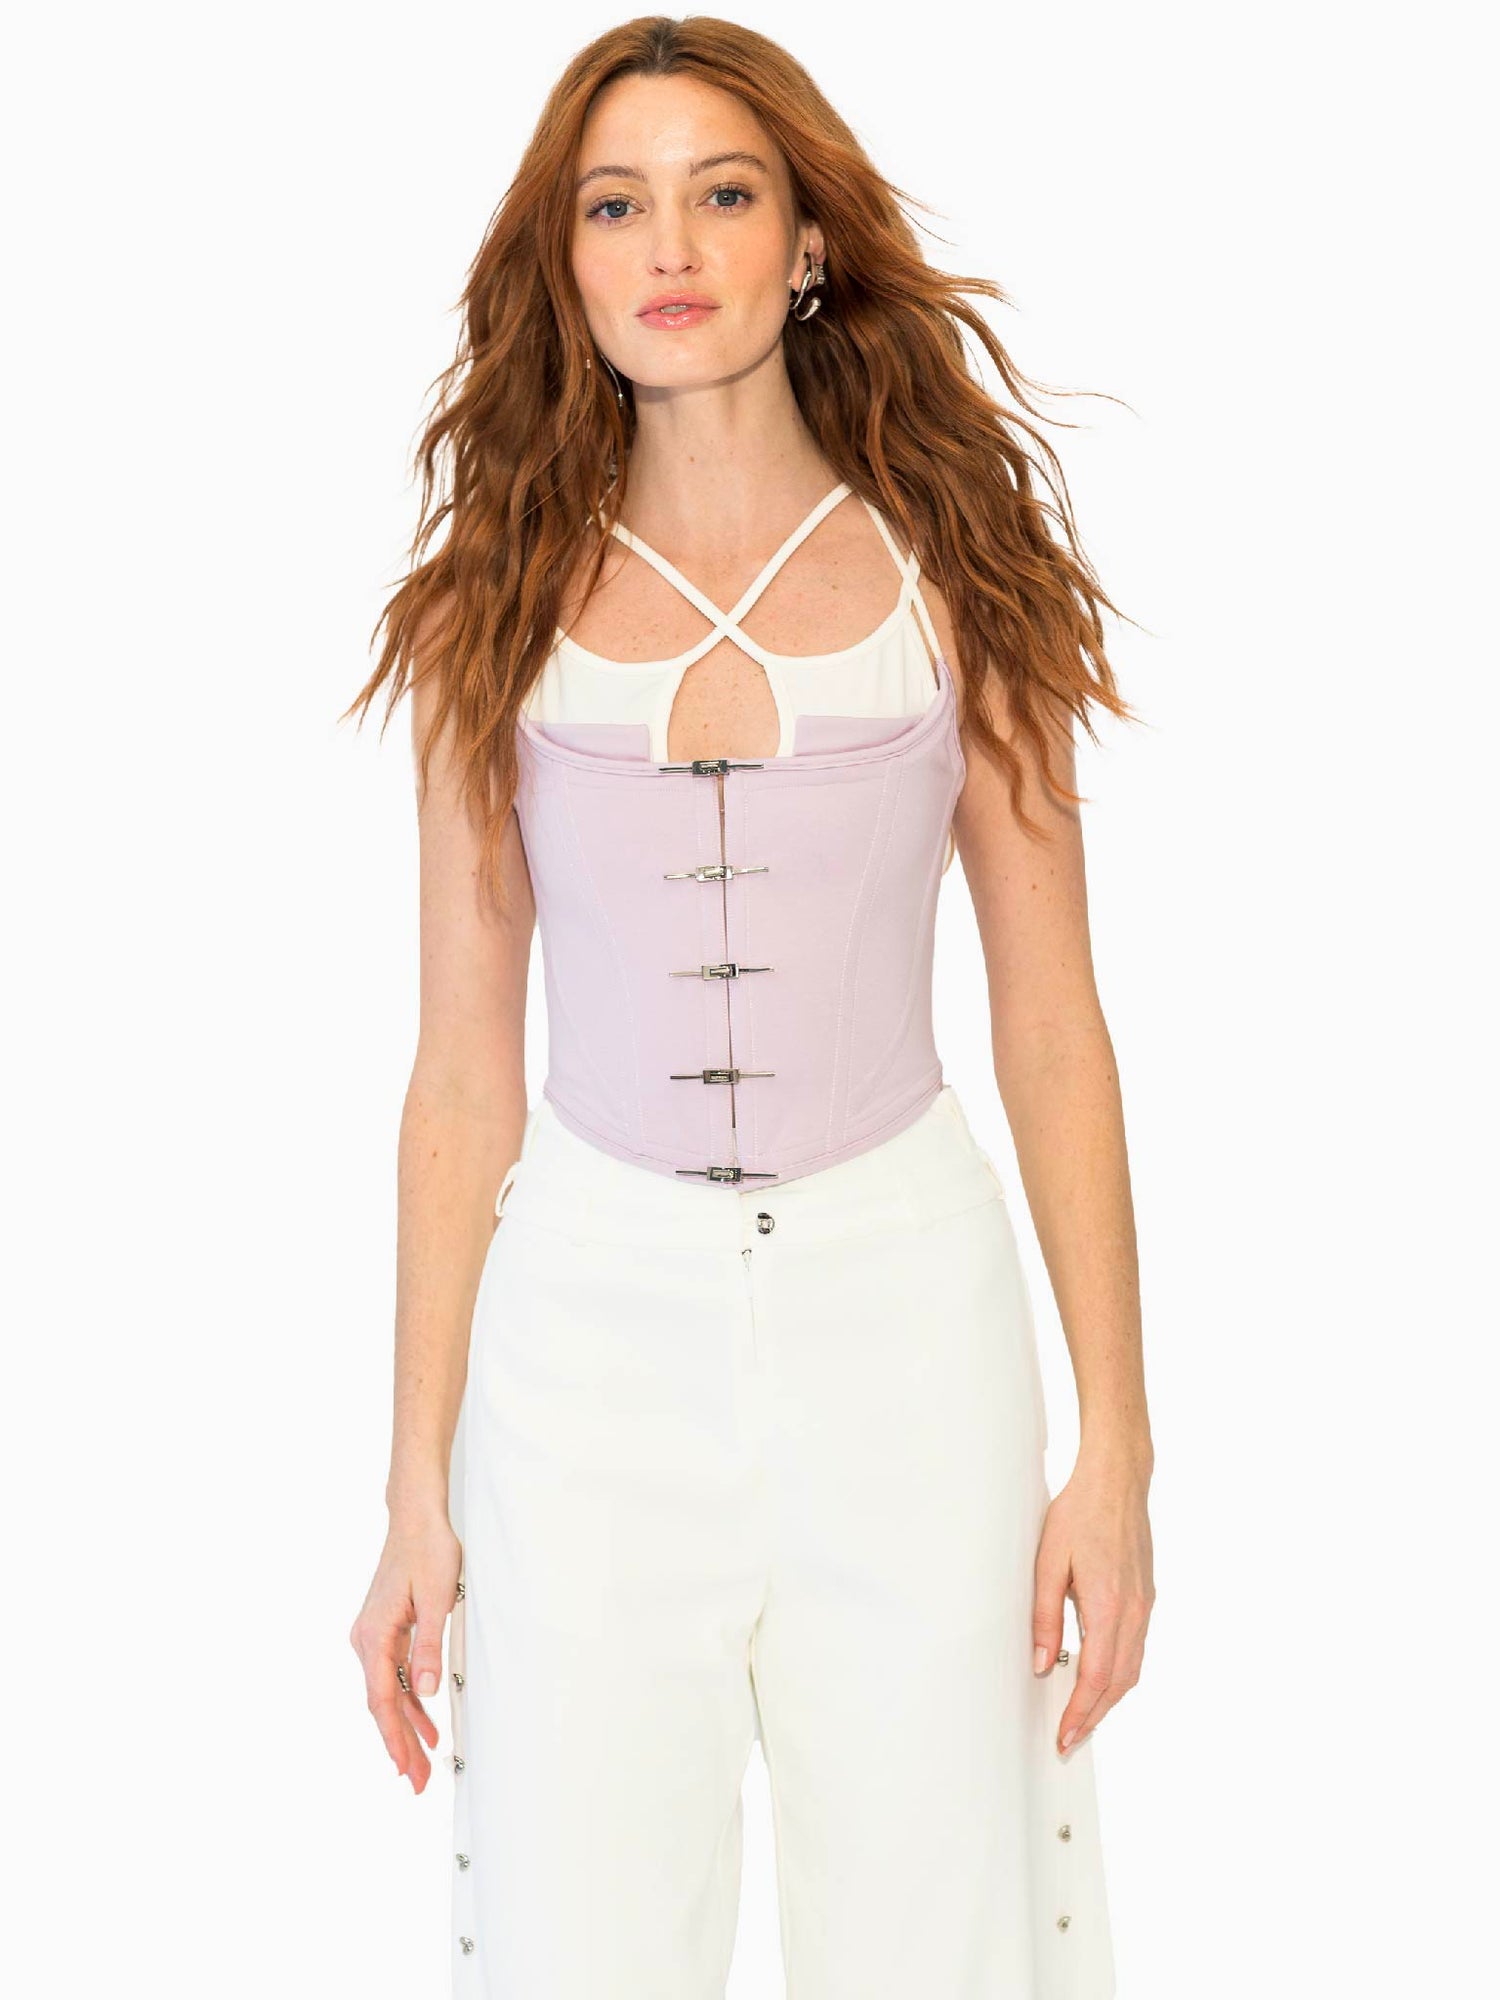 HAN WEN Stretchy X-Bralette Layered Corset Top in Lavender